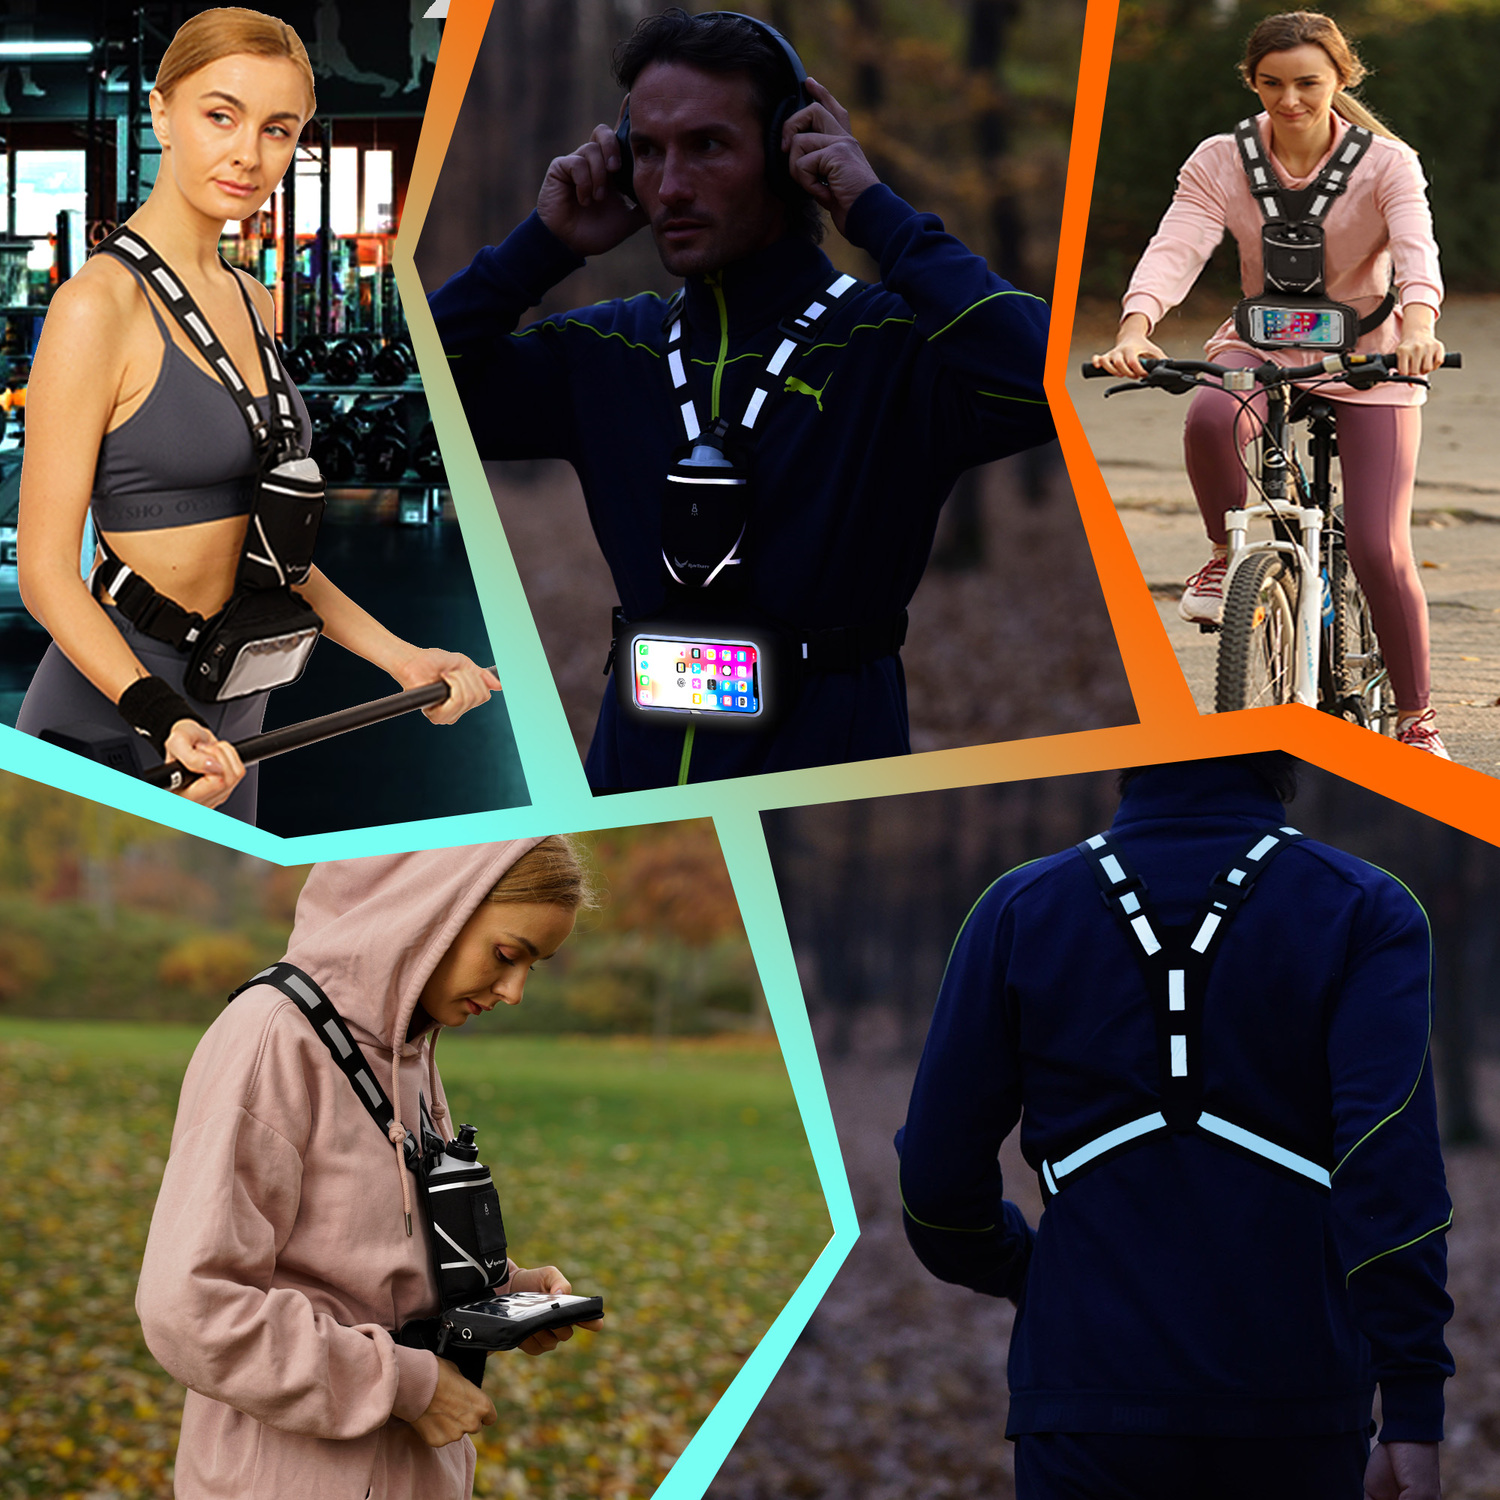 Runtasty Hydrochest -&nbsp; Chest Pack Night Reflective Vest with Phone Holder and Water Bottle Holder - Ideal for Hiking, Walking, Cycling, Jogging, Night Working, Climbing and more!